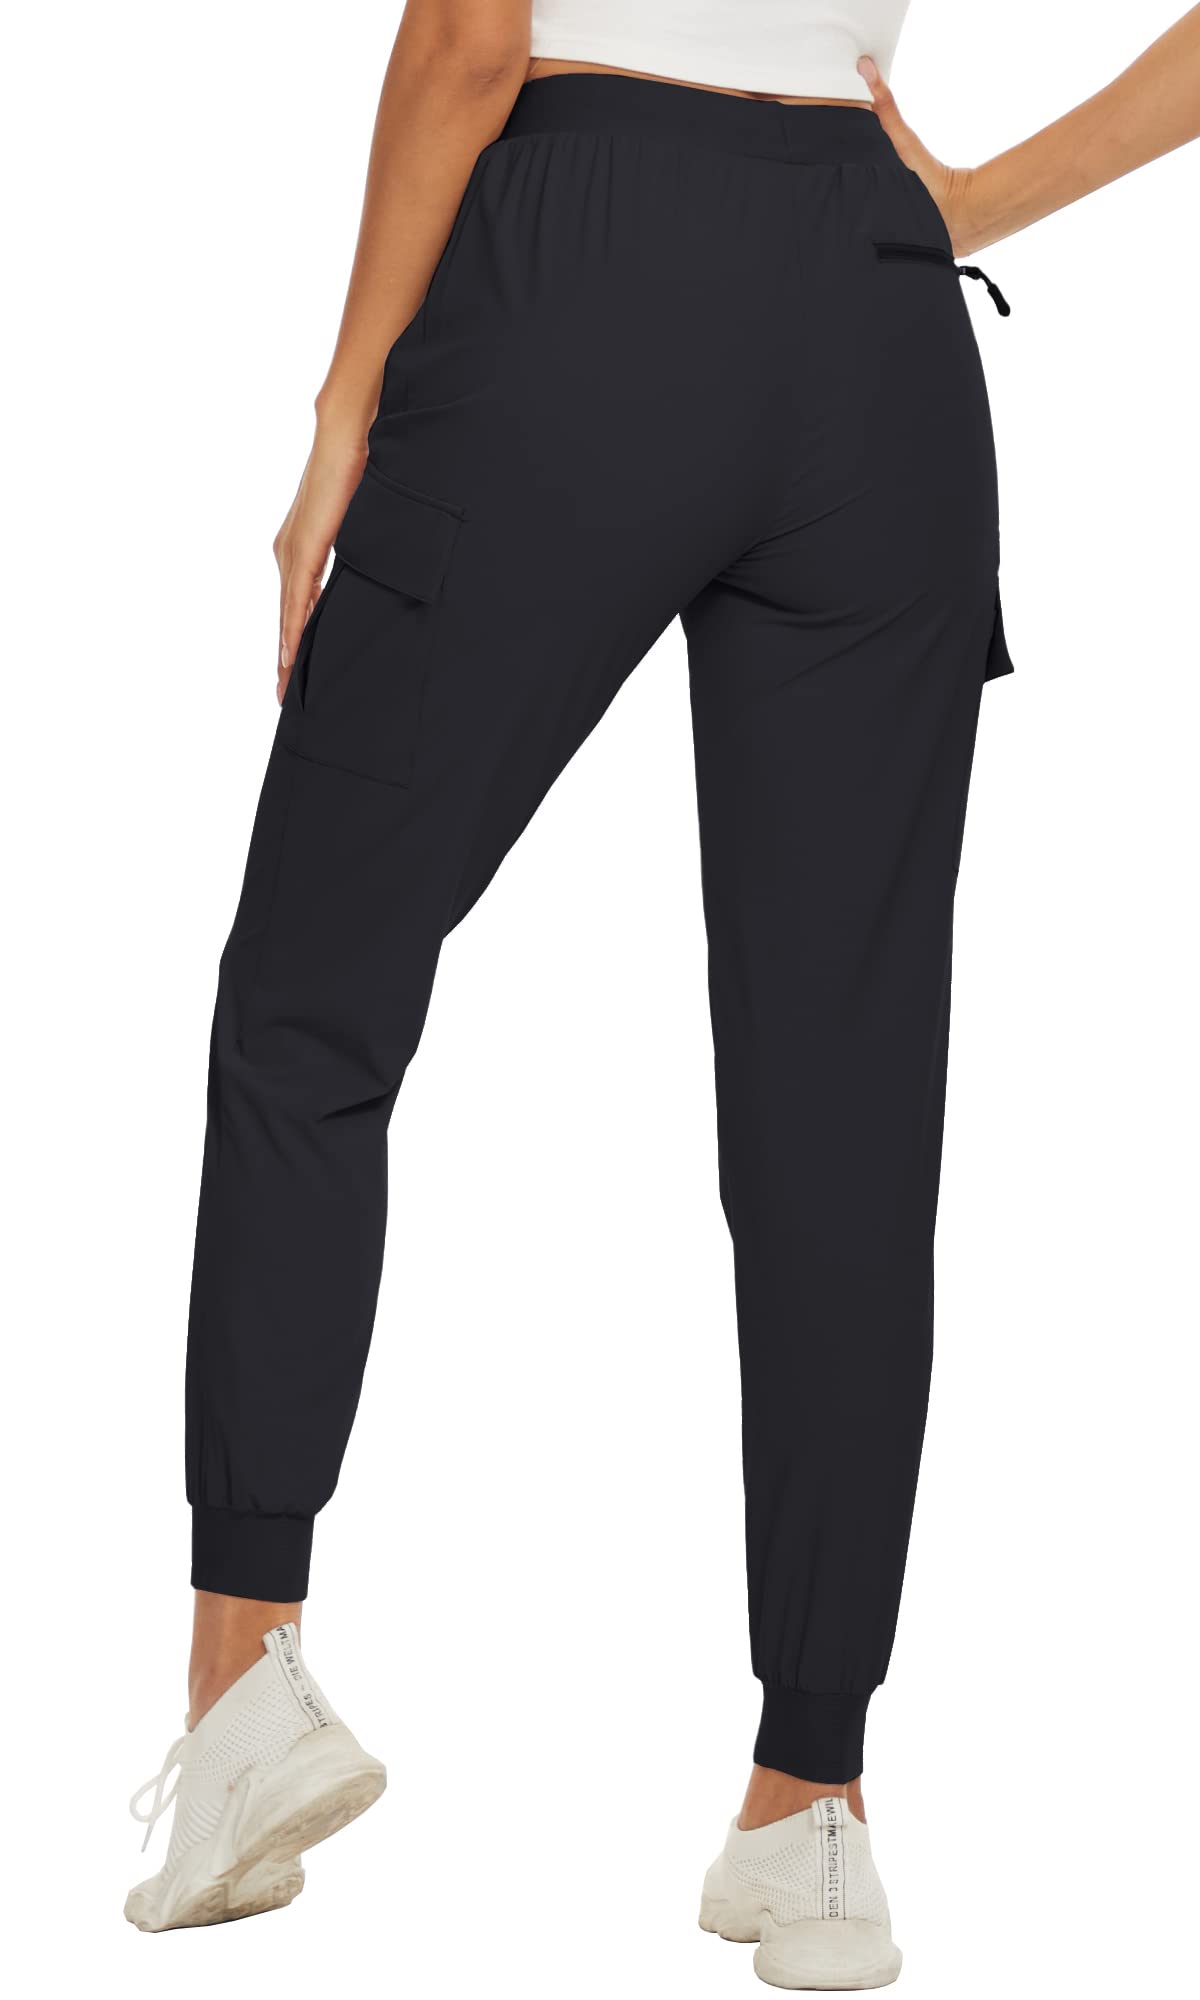 Quick Dry Hiking Pants Women's Casual Long Pants Elastic Waist Zipper  Pocket Athletic Trousers Running Workout Bottoms